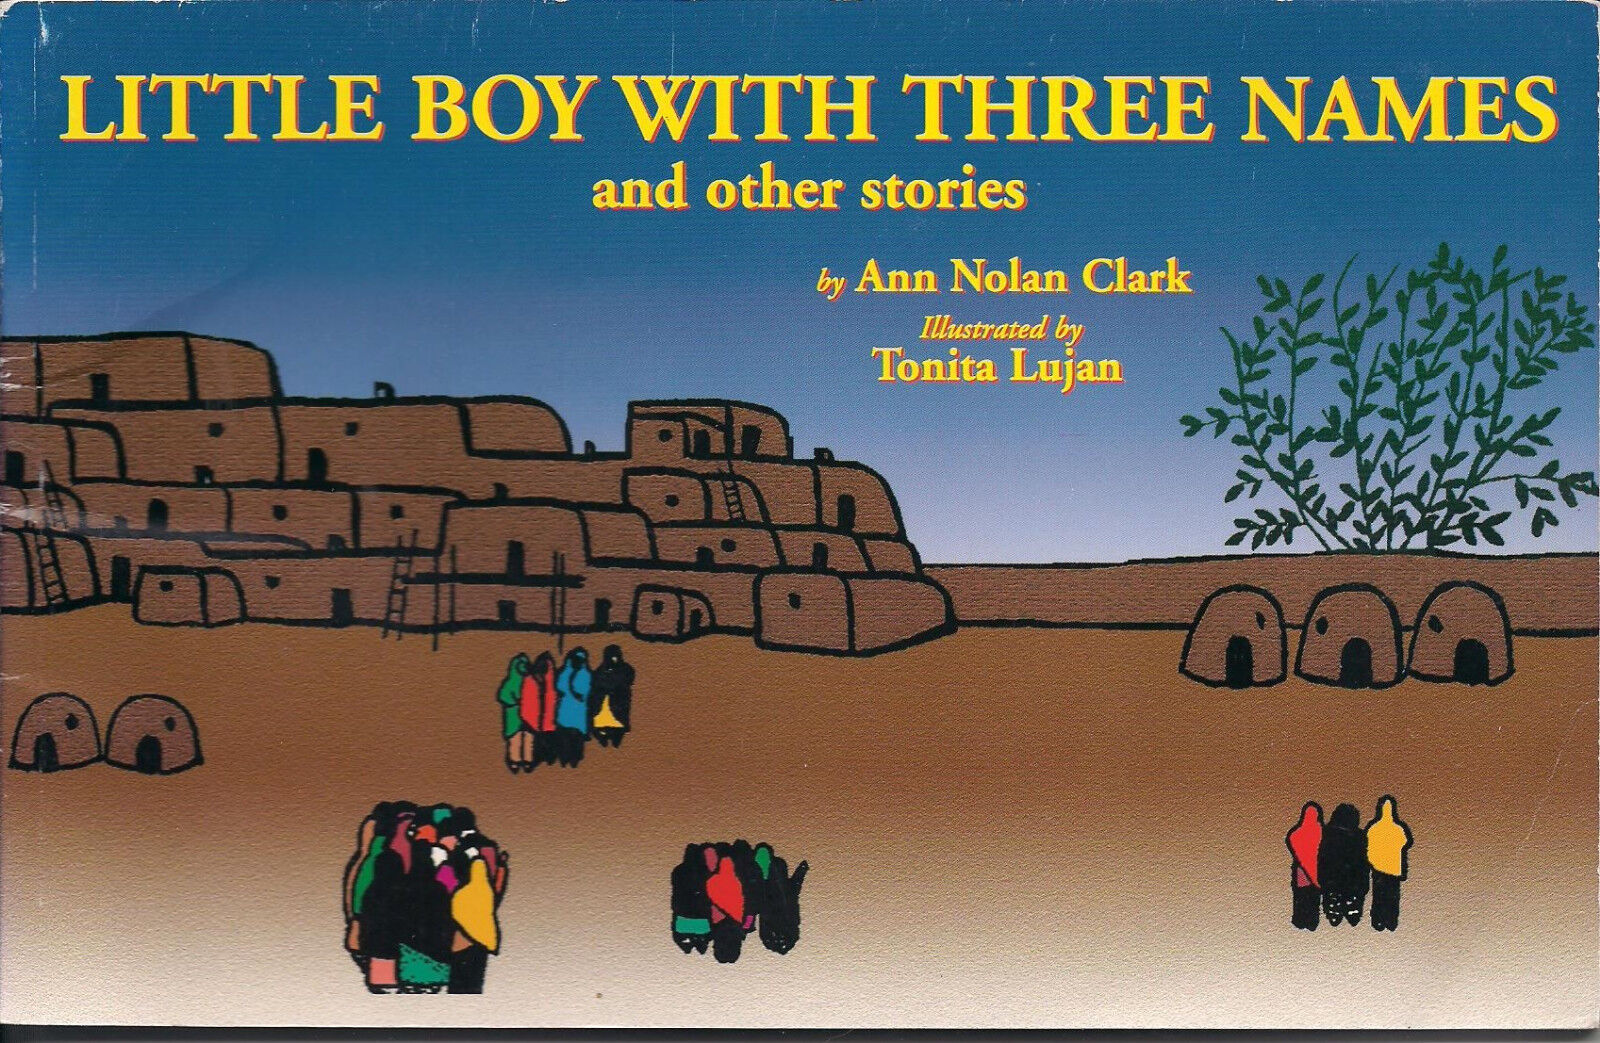 Little Boy with Three Names, ill. by Tonita Lujan (6 copies in one auction) 